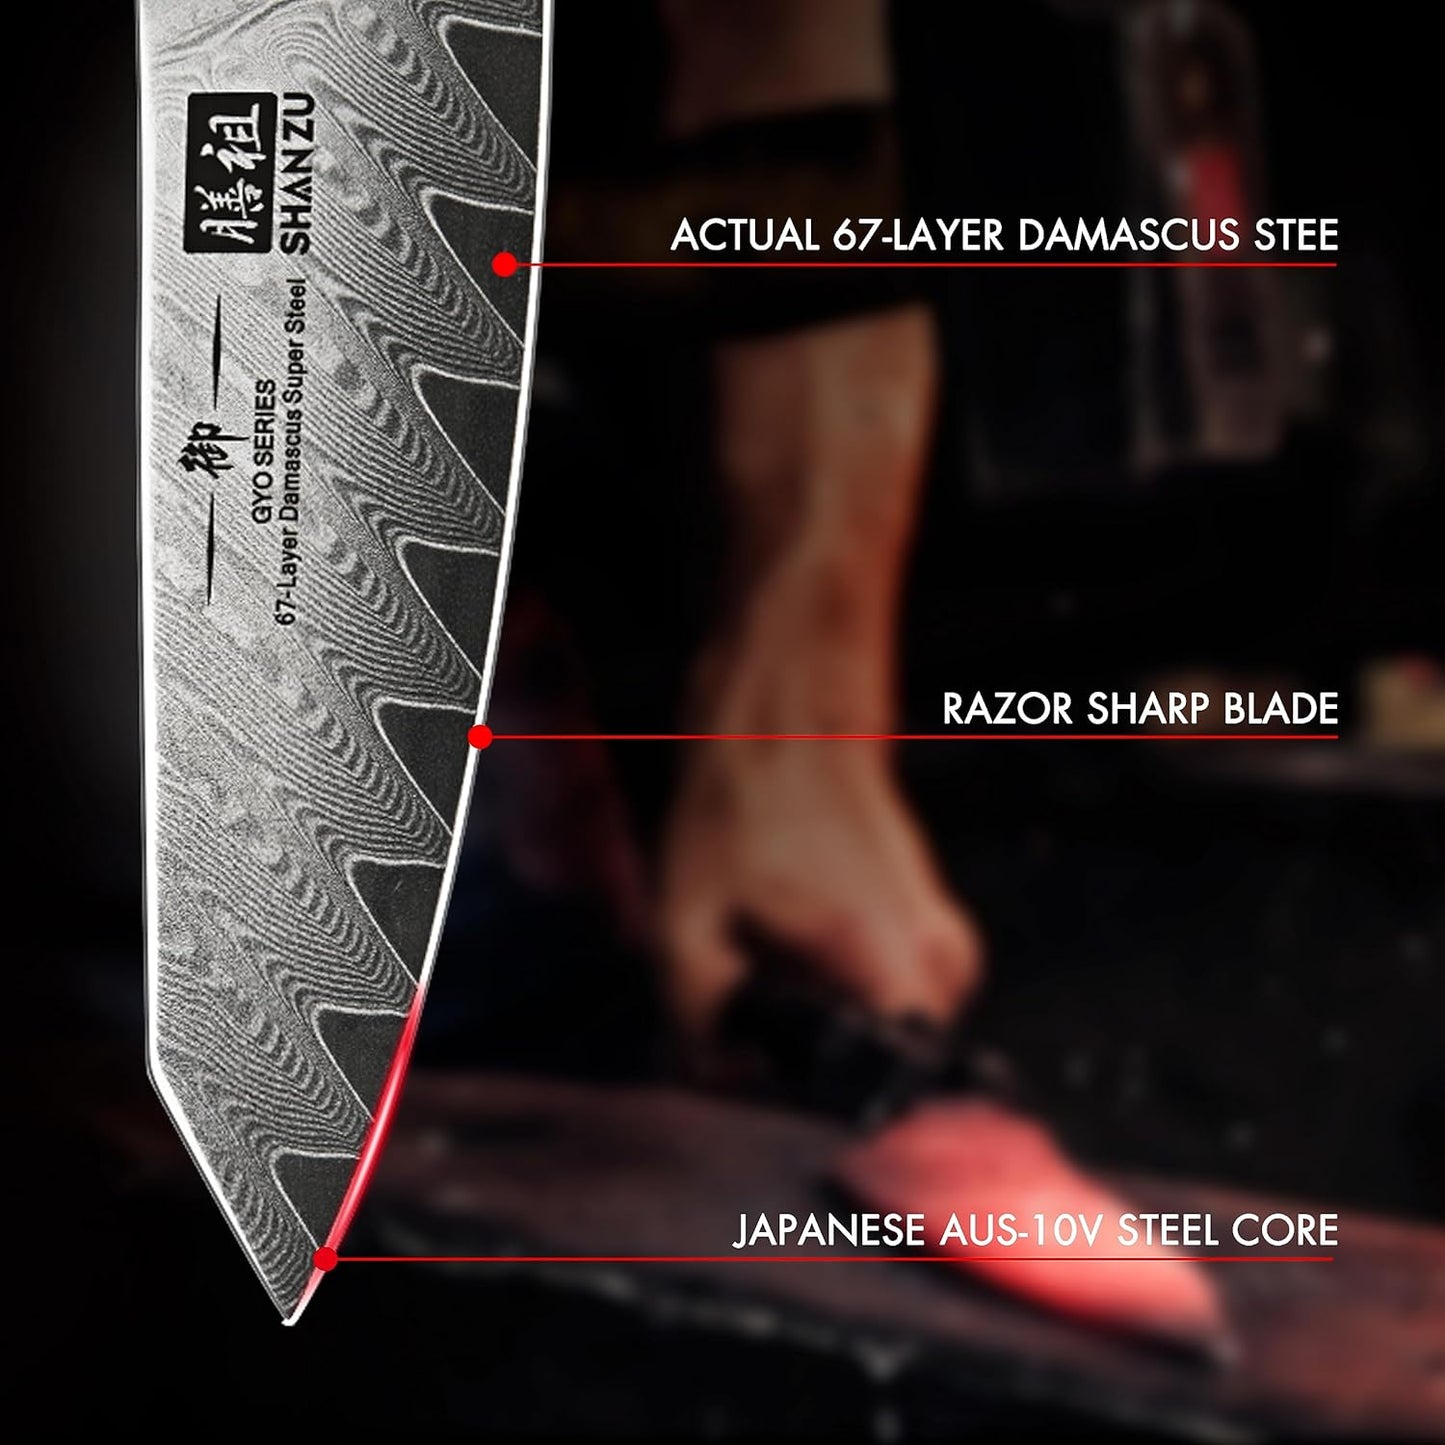 KD Japanese Paring Knife 67-Layers Damascus Knife with Gift Box